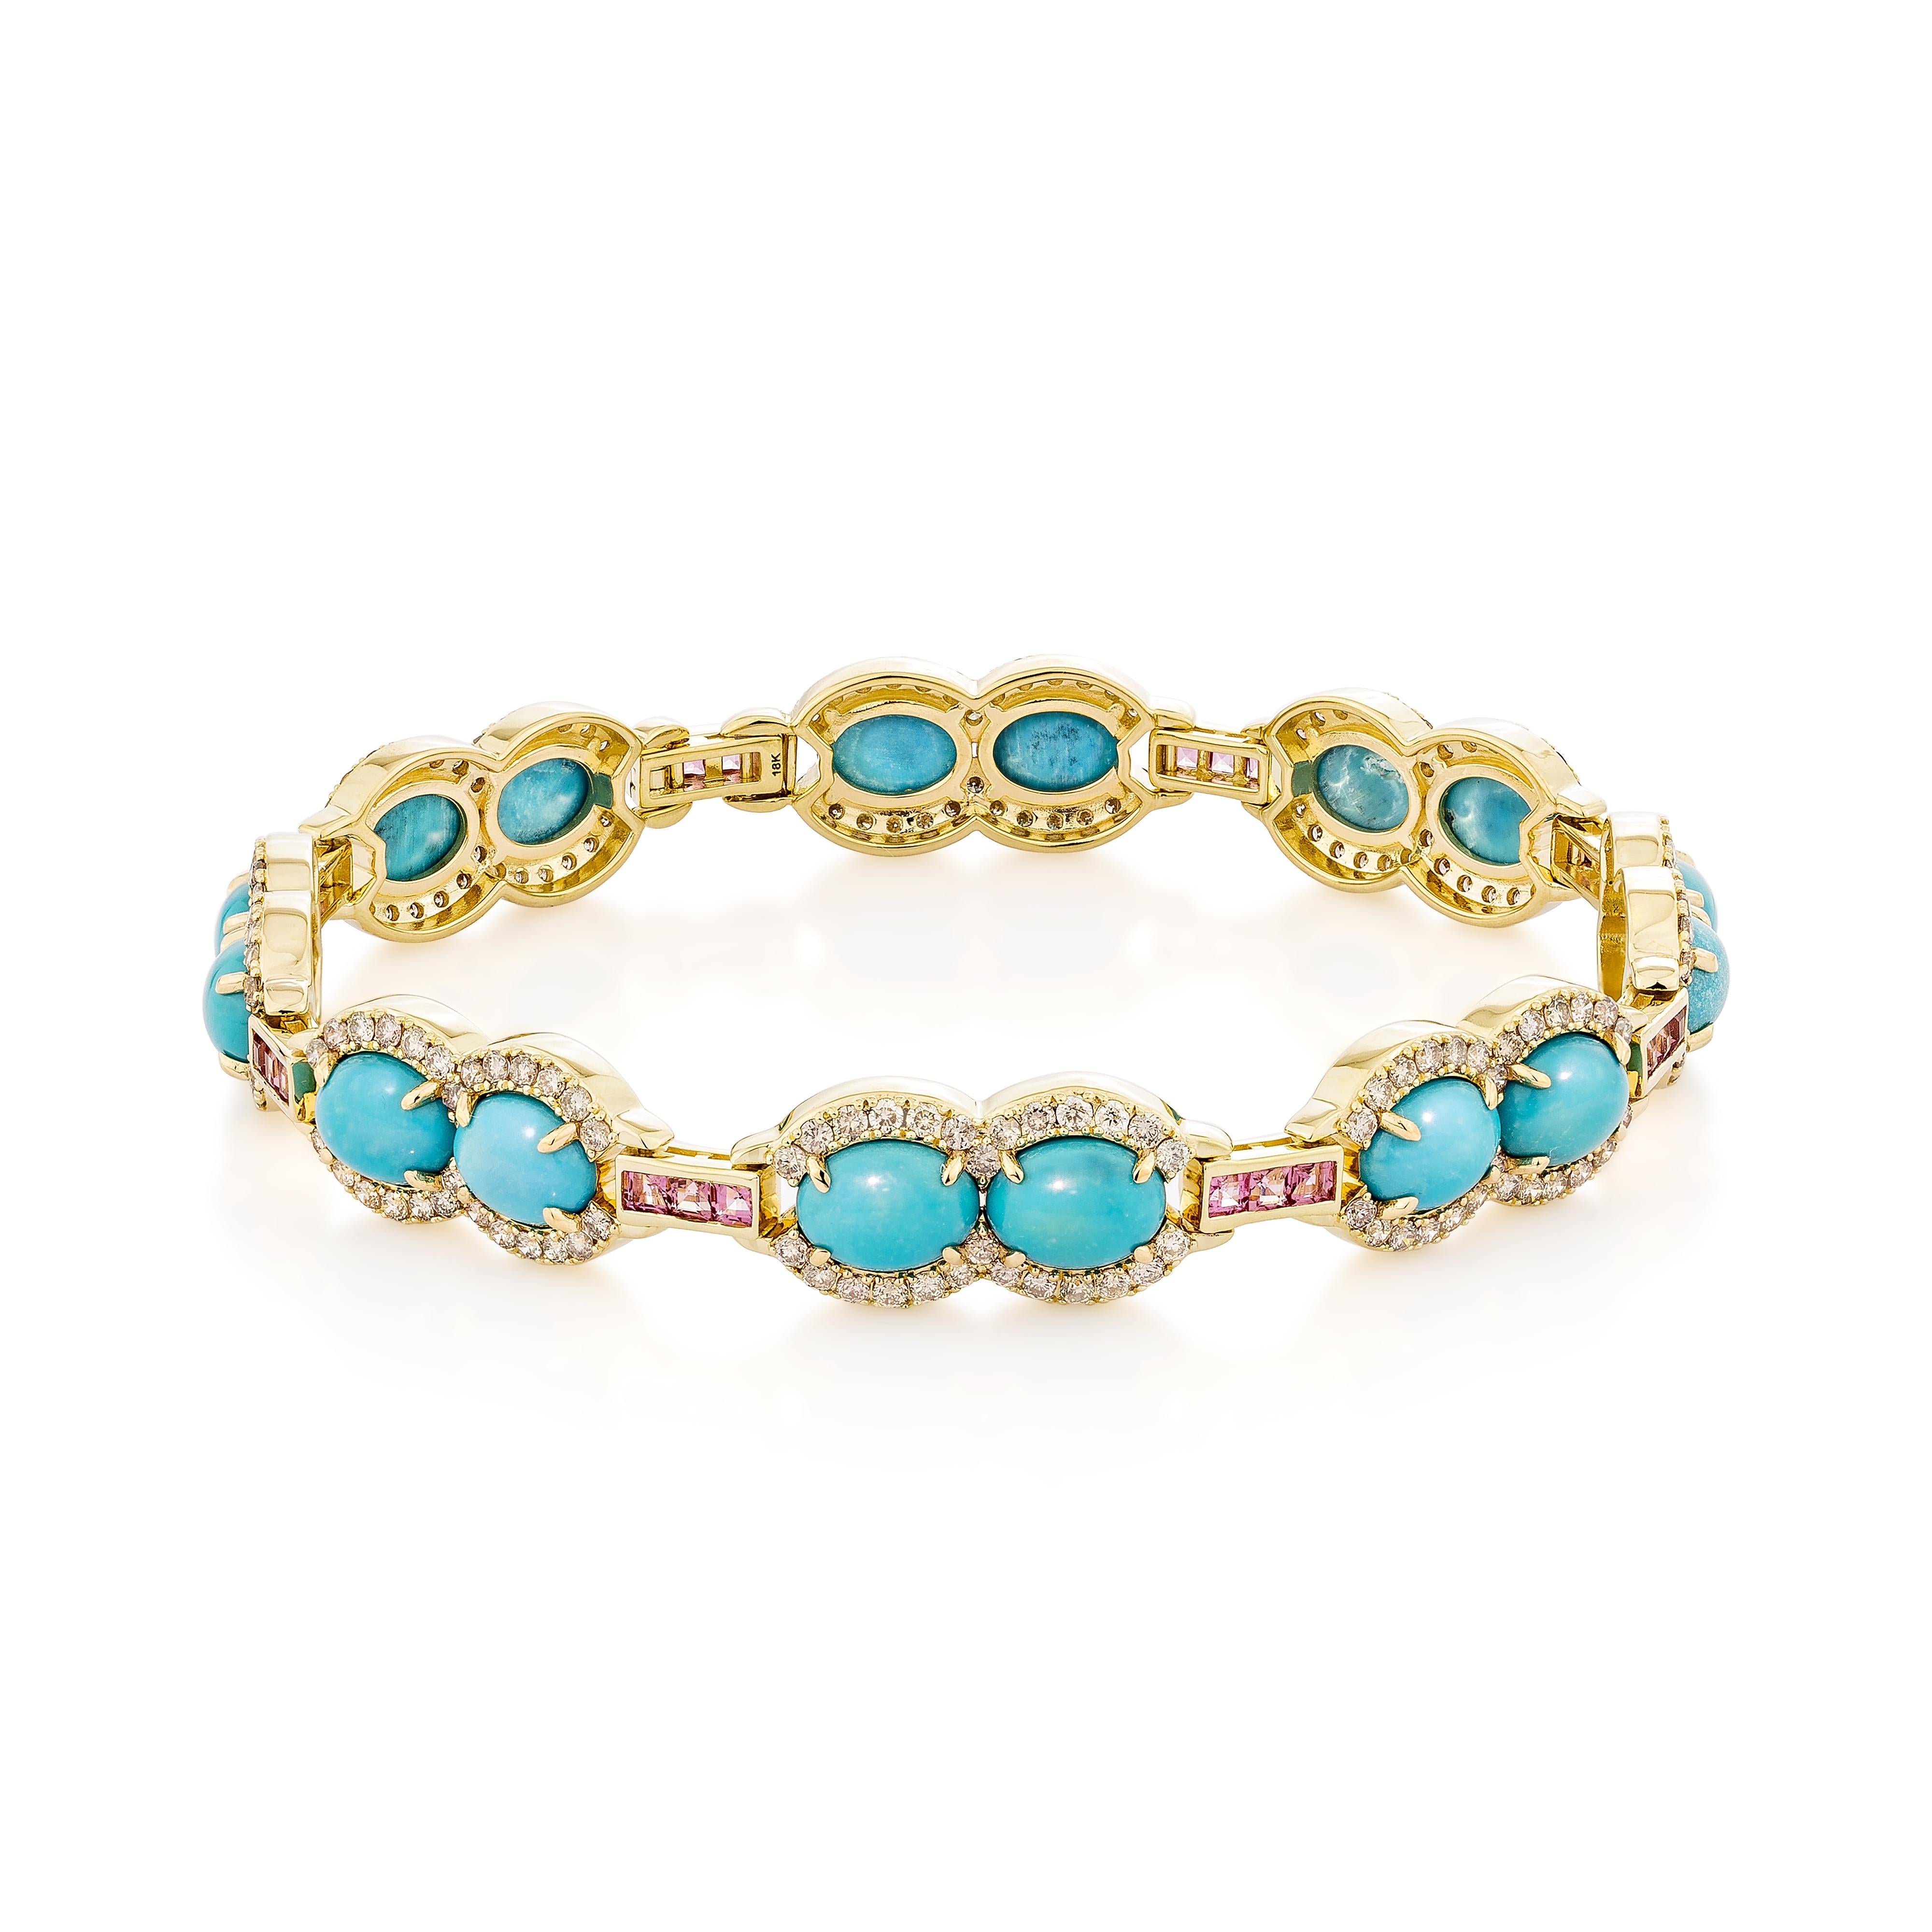 Contemporary 16.55 Carat Turquoise Bracelet in 14KYG with Pink Tourmaline and White Diamond. For Sale